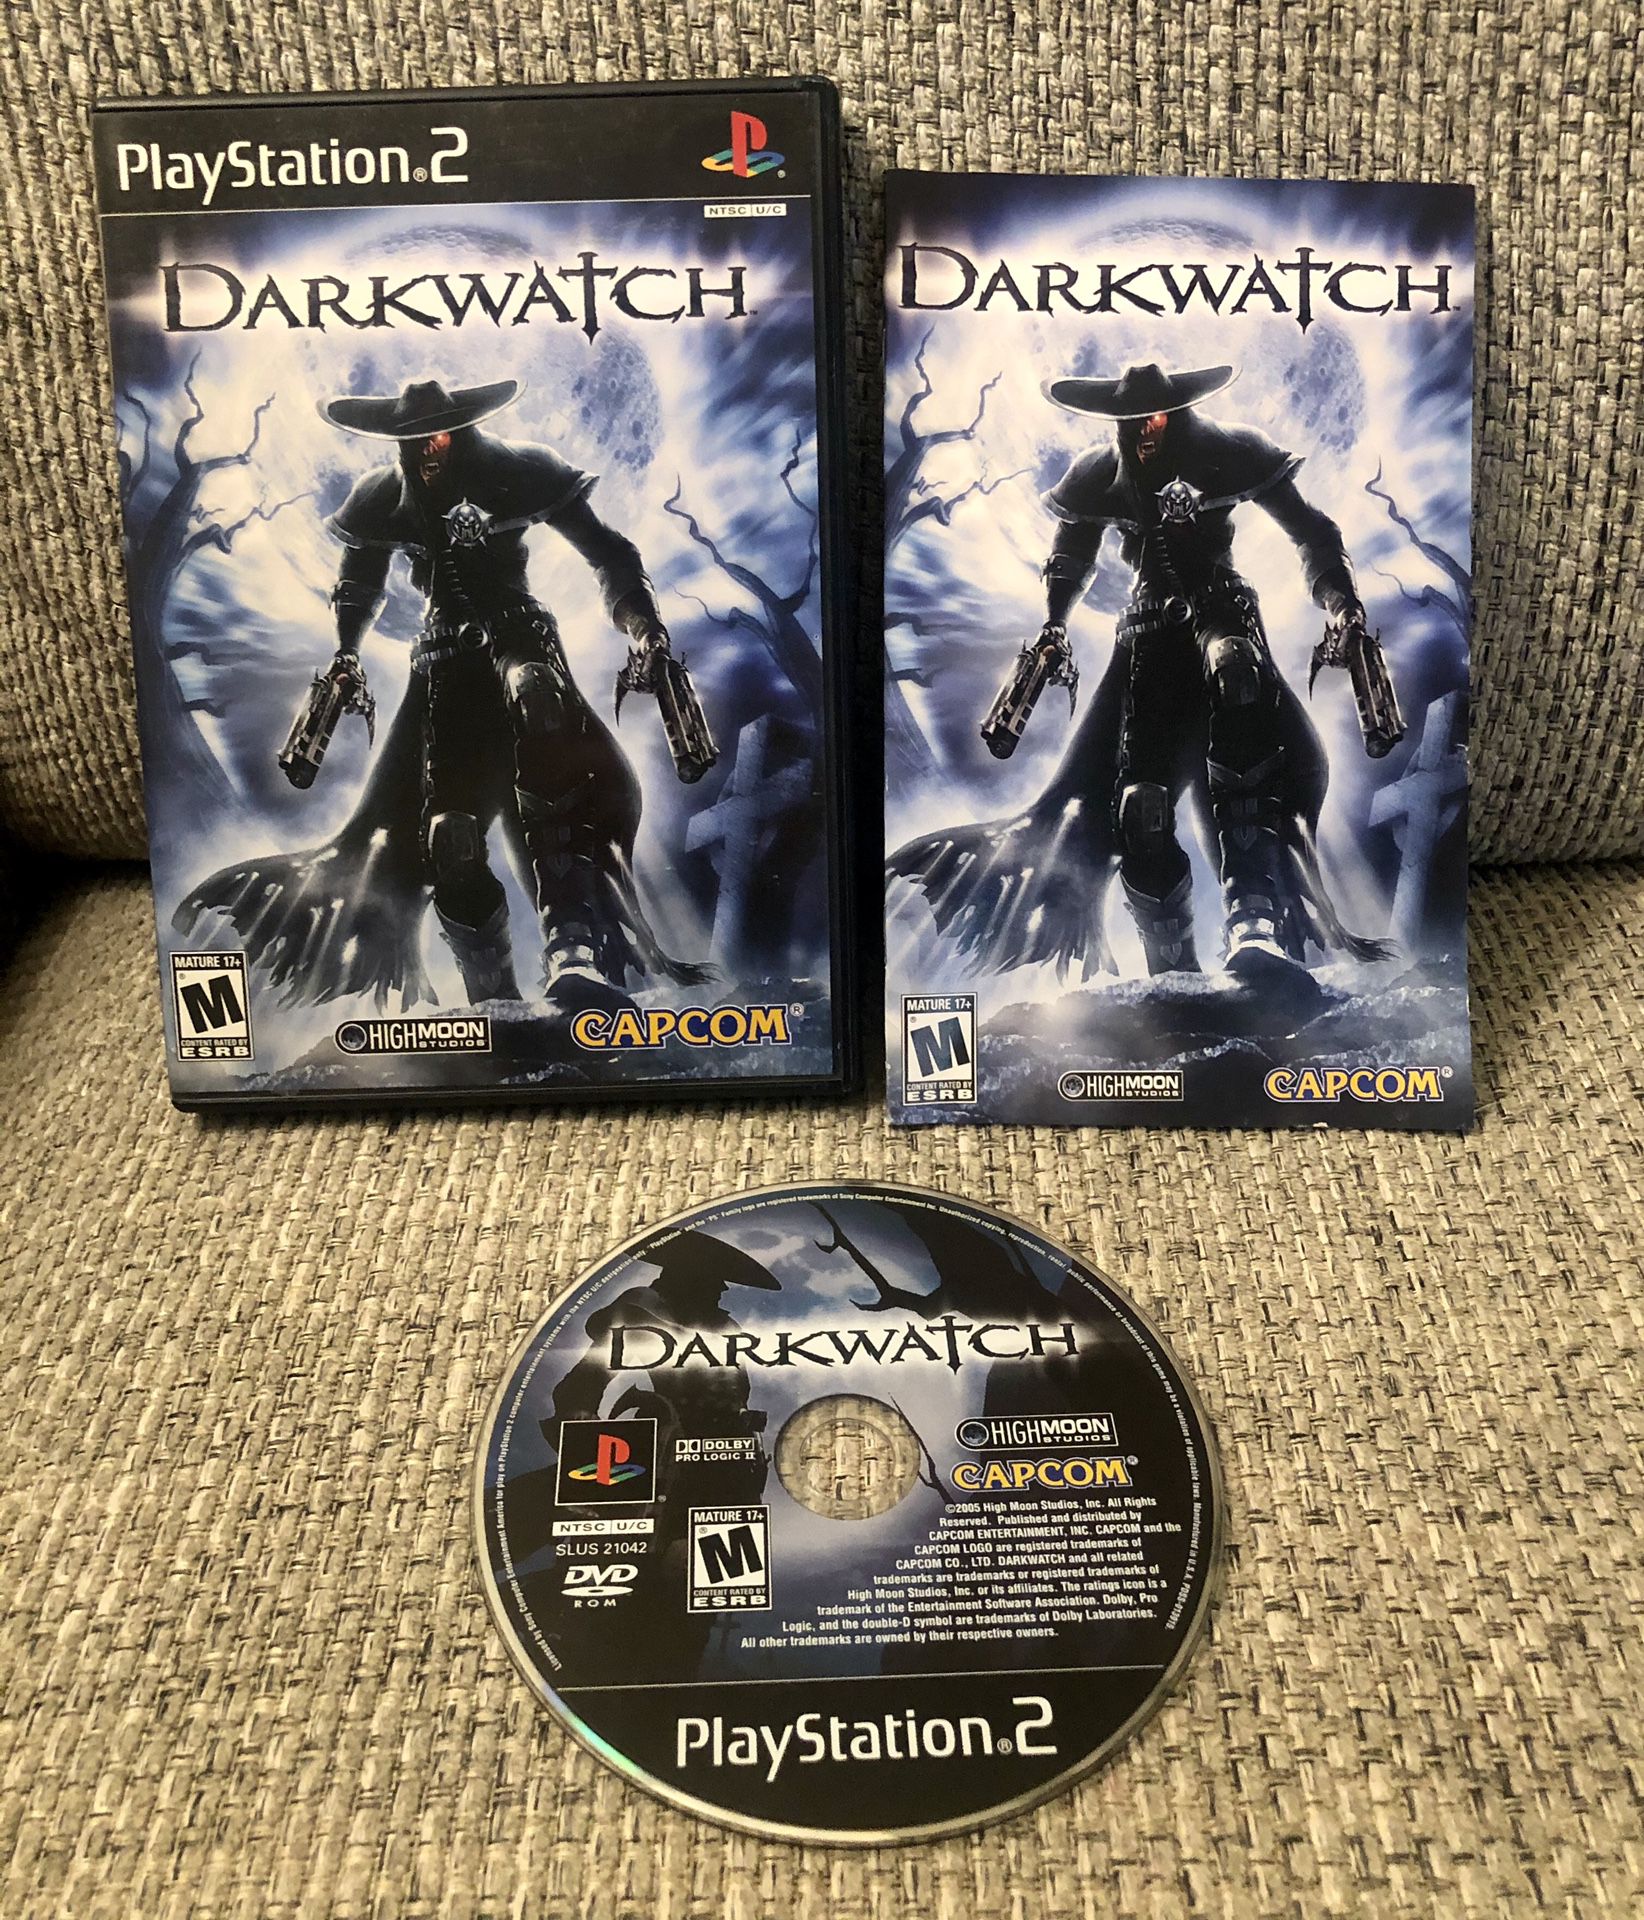 Darkwatch - BLACK LABEL, Complete, Tested (Sony PlayStation 2, 2005) PS2